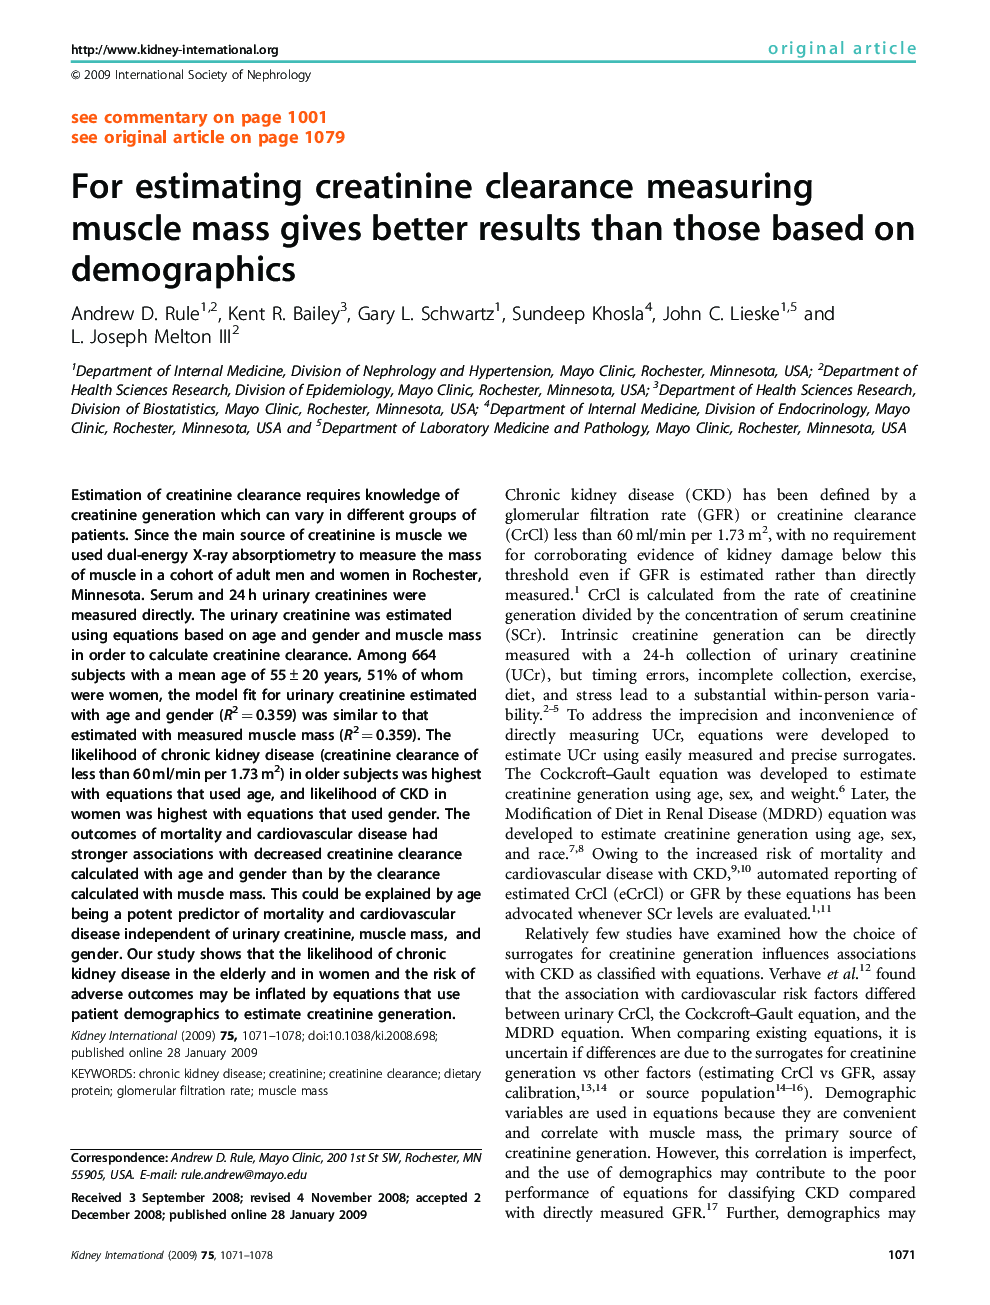 For estimating creatinine clearance measuring muscle mass gives better results than those based on demographics